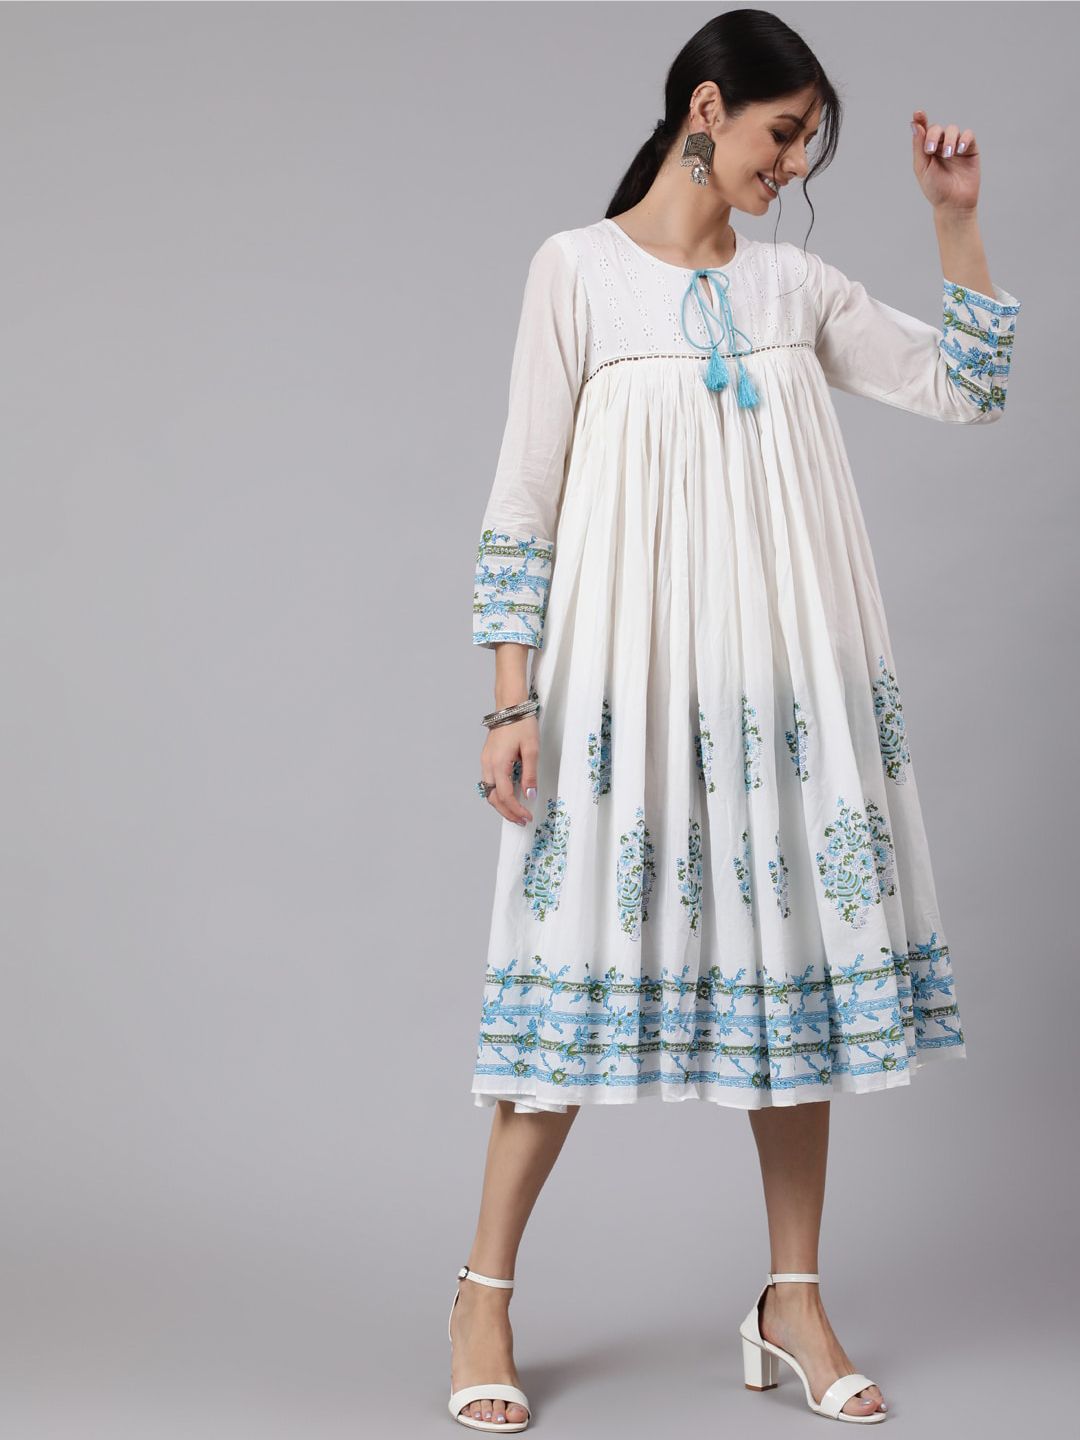 Awadhi White & Blue Floral Print Tie-Up Neck A-Line Midi Dress Price in India